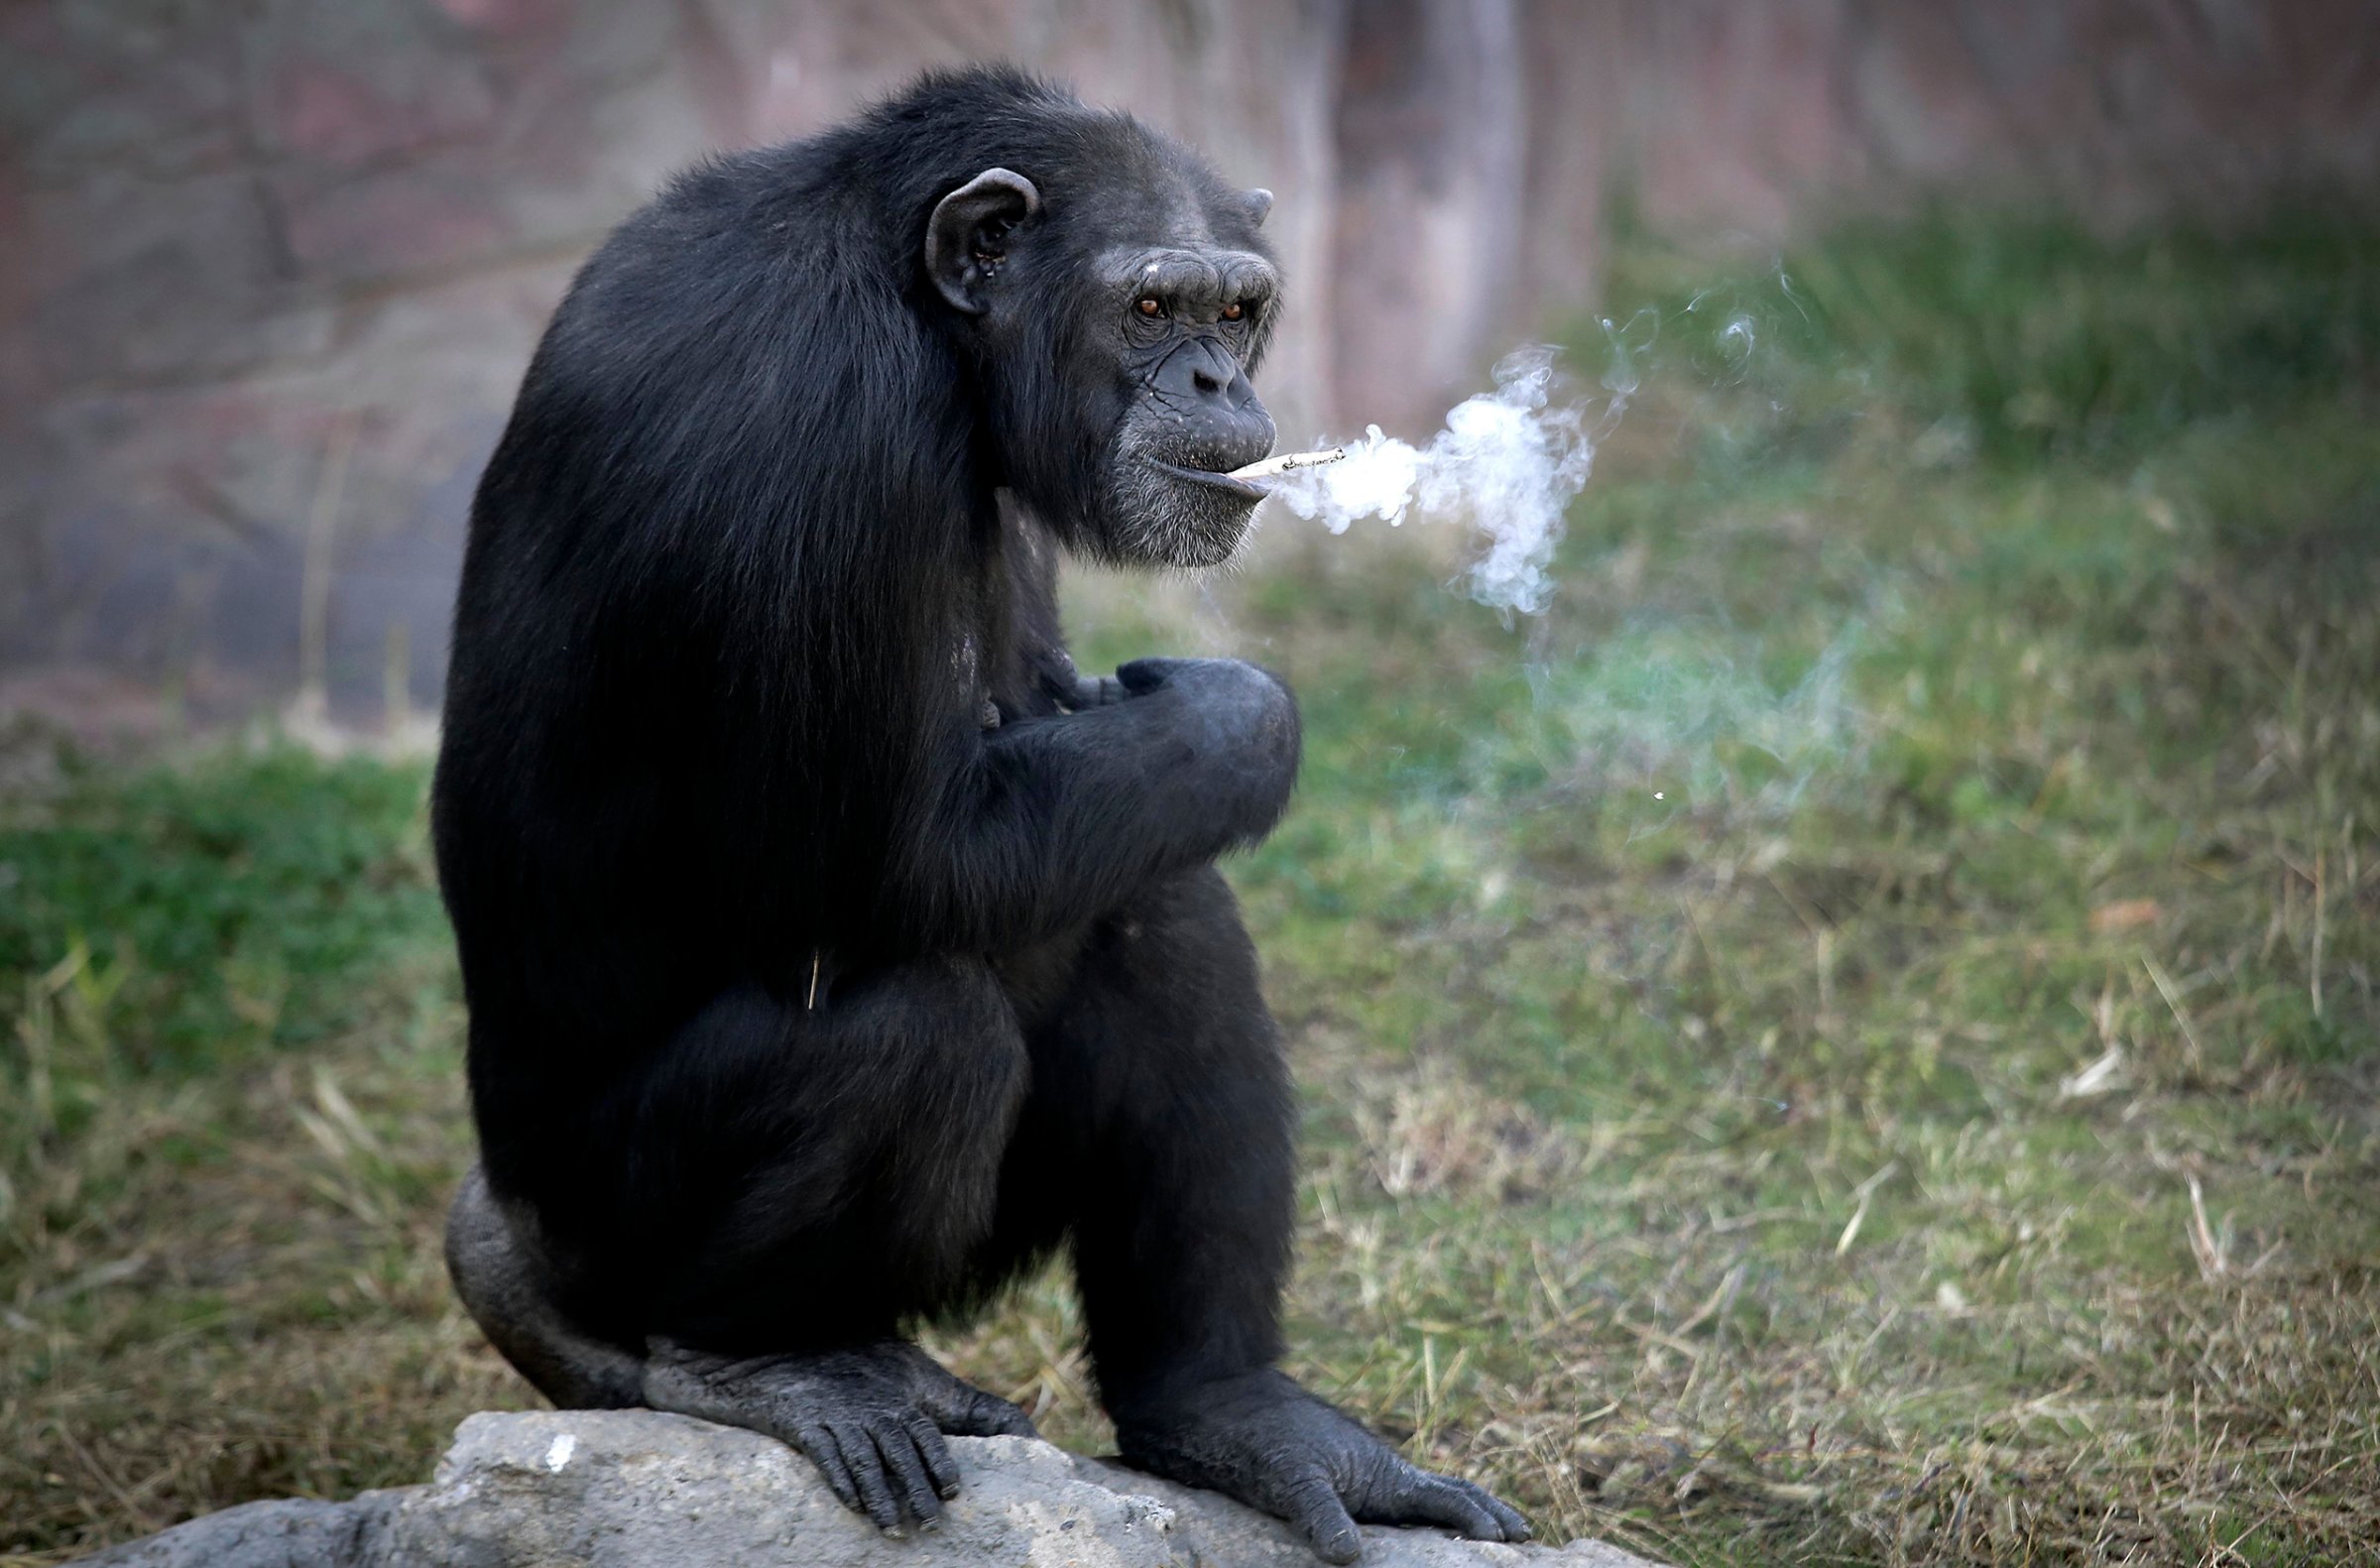 Azalea, a 19-year-old female chimpanzee whose Korean name is "Dallae," smokes a cigarette in her enclosure at the Central Zoo in Pyongyang, North Korea, on Oct. 19, 2016. According to officials at the newly renovated zoo, which has become a favorite leisure spot in the capital since it was re-opened in July, the chimpanzee smokes about a pack a day. They insist, however, that she does not inhale.